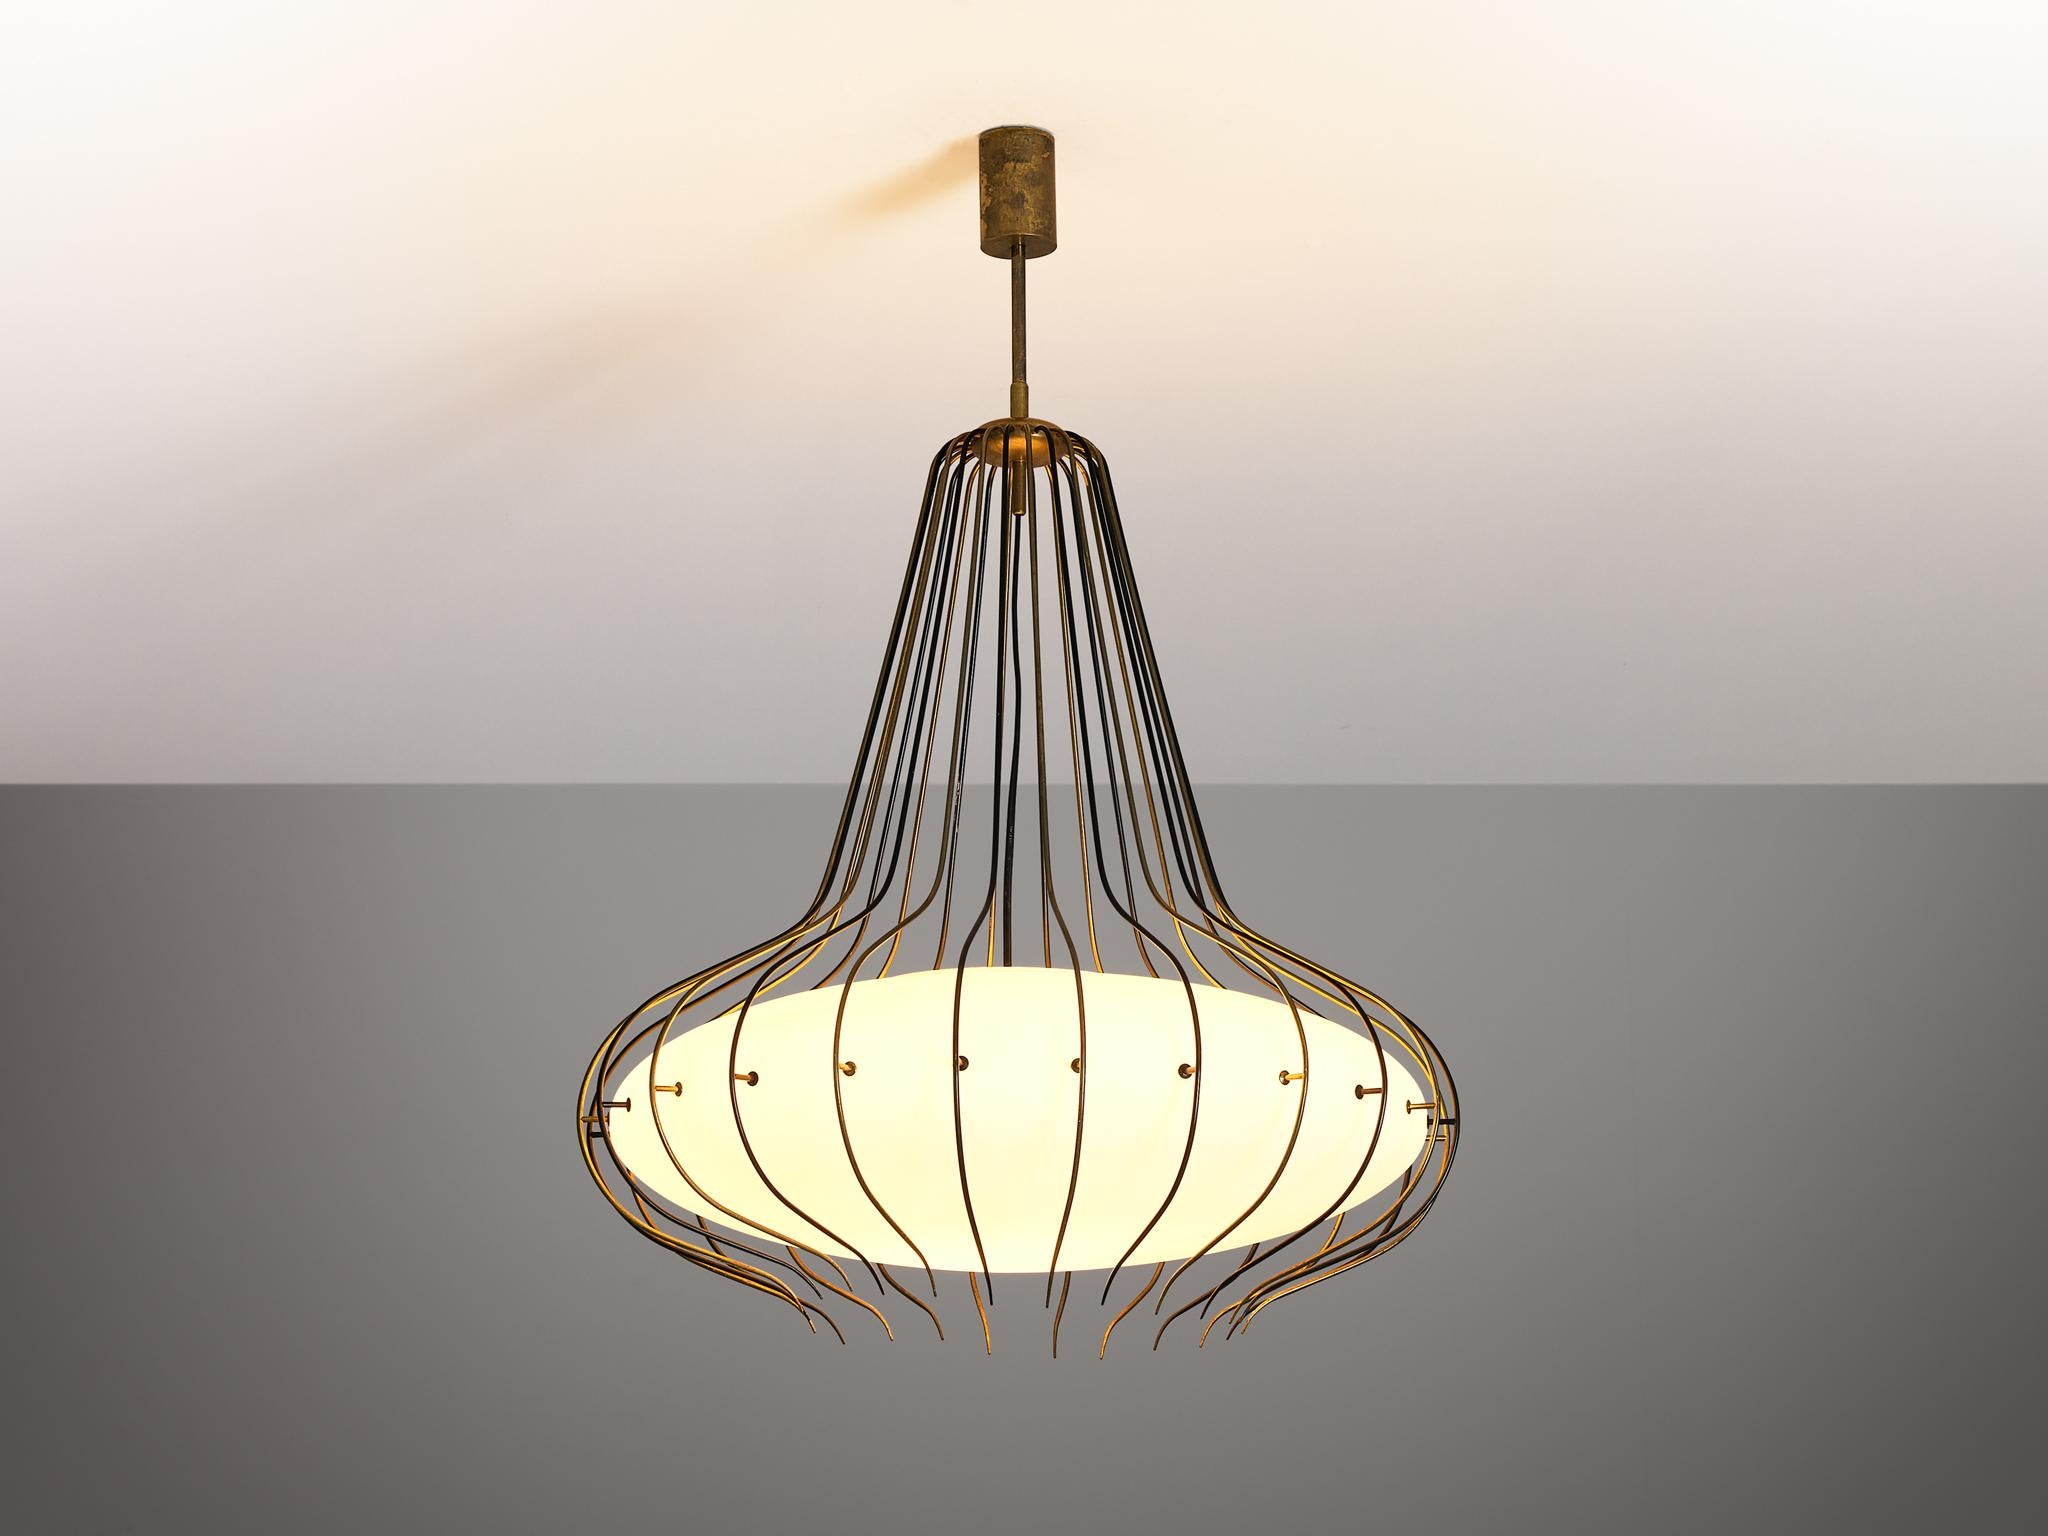 Angelo Lelii for Arredoluce 'Medusa' chandelier, model '12699', coated polished brass, polished brass, duplex white opal glass, Italy, circa 1958 

This rare ceiling light, designed by Angelo Lelii for Arredoluce in Italy around 1958, is a true